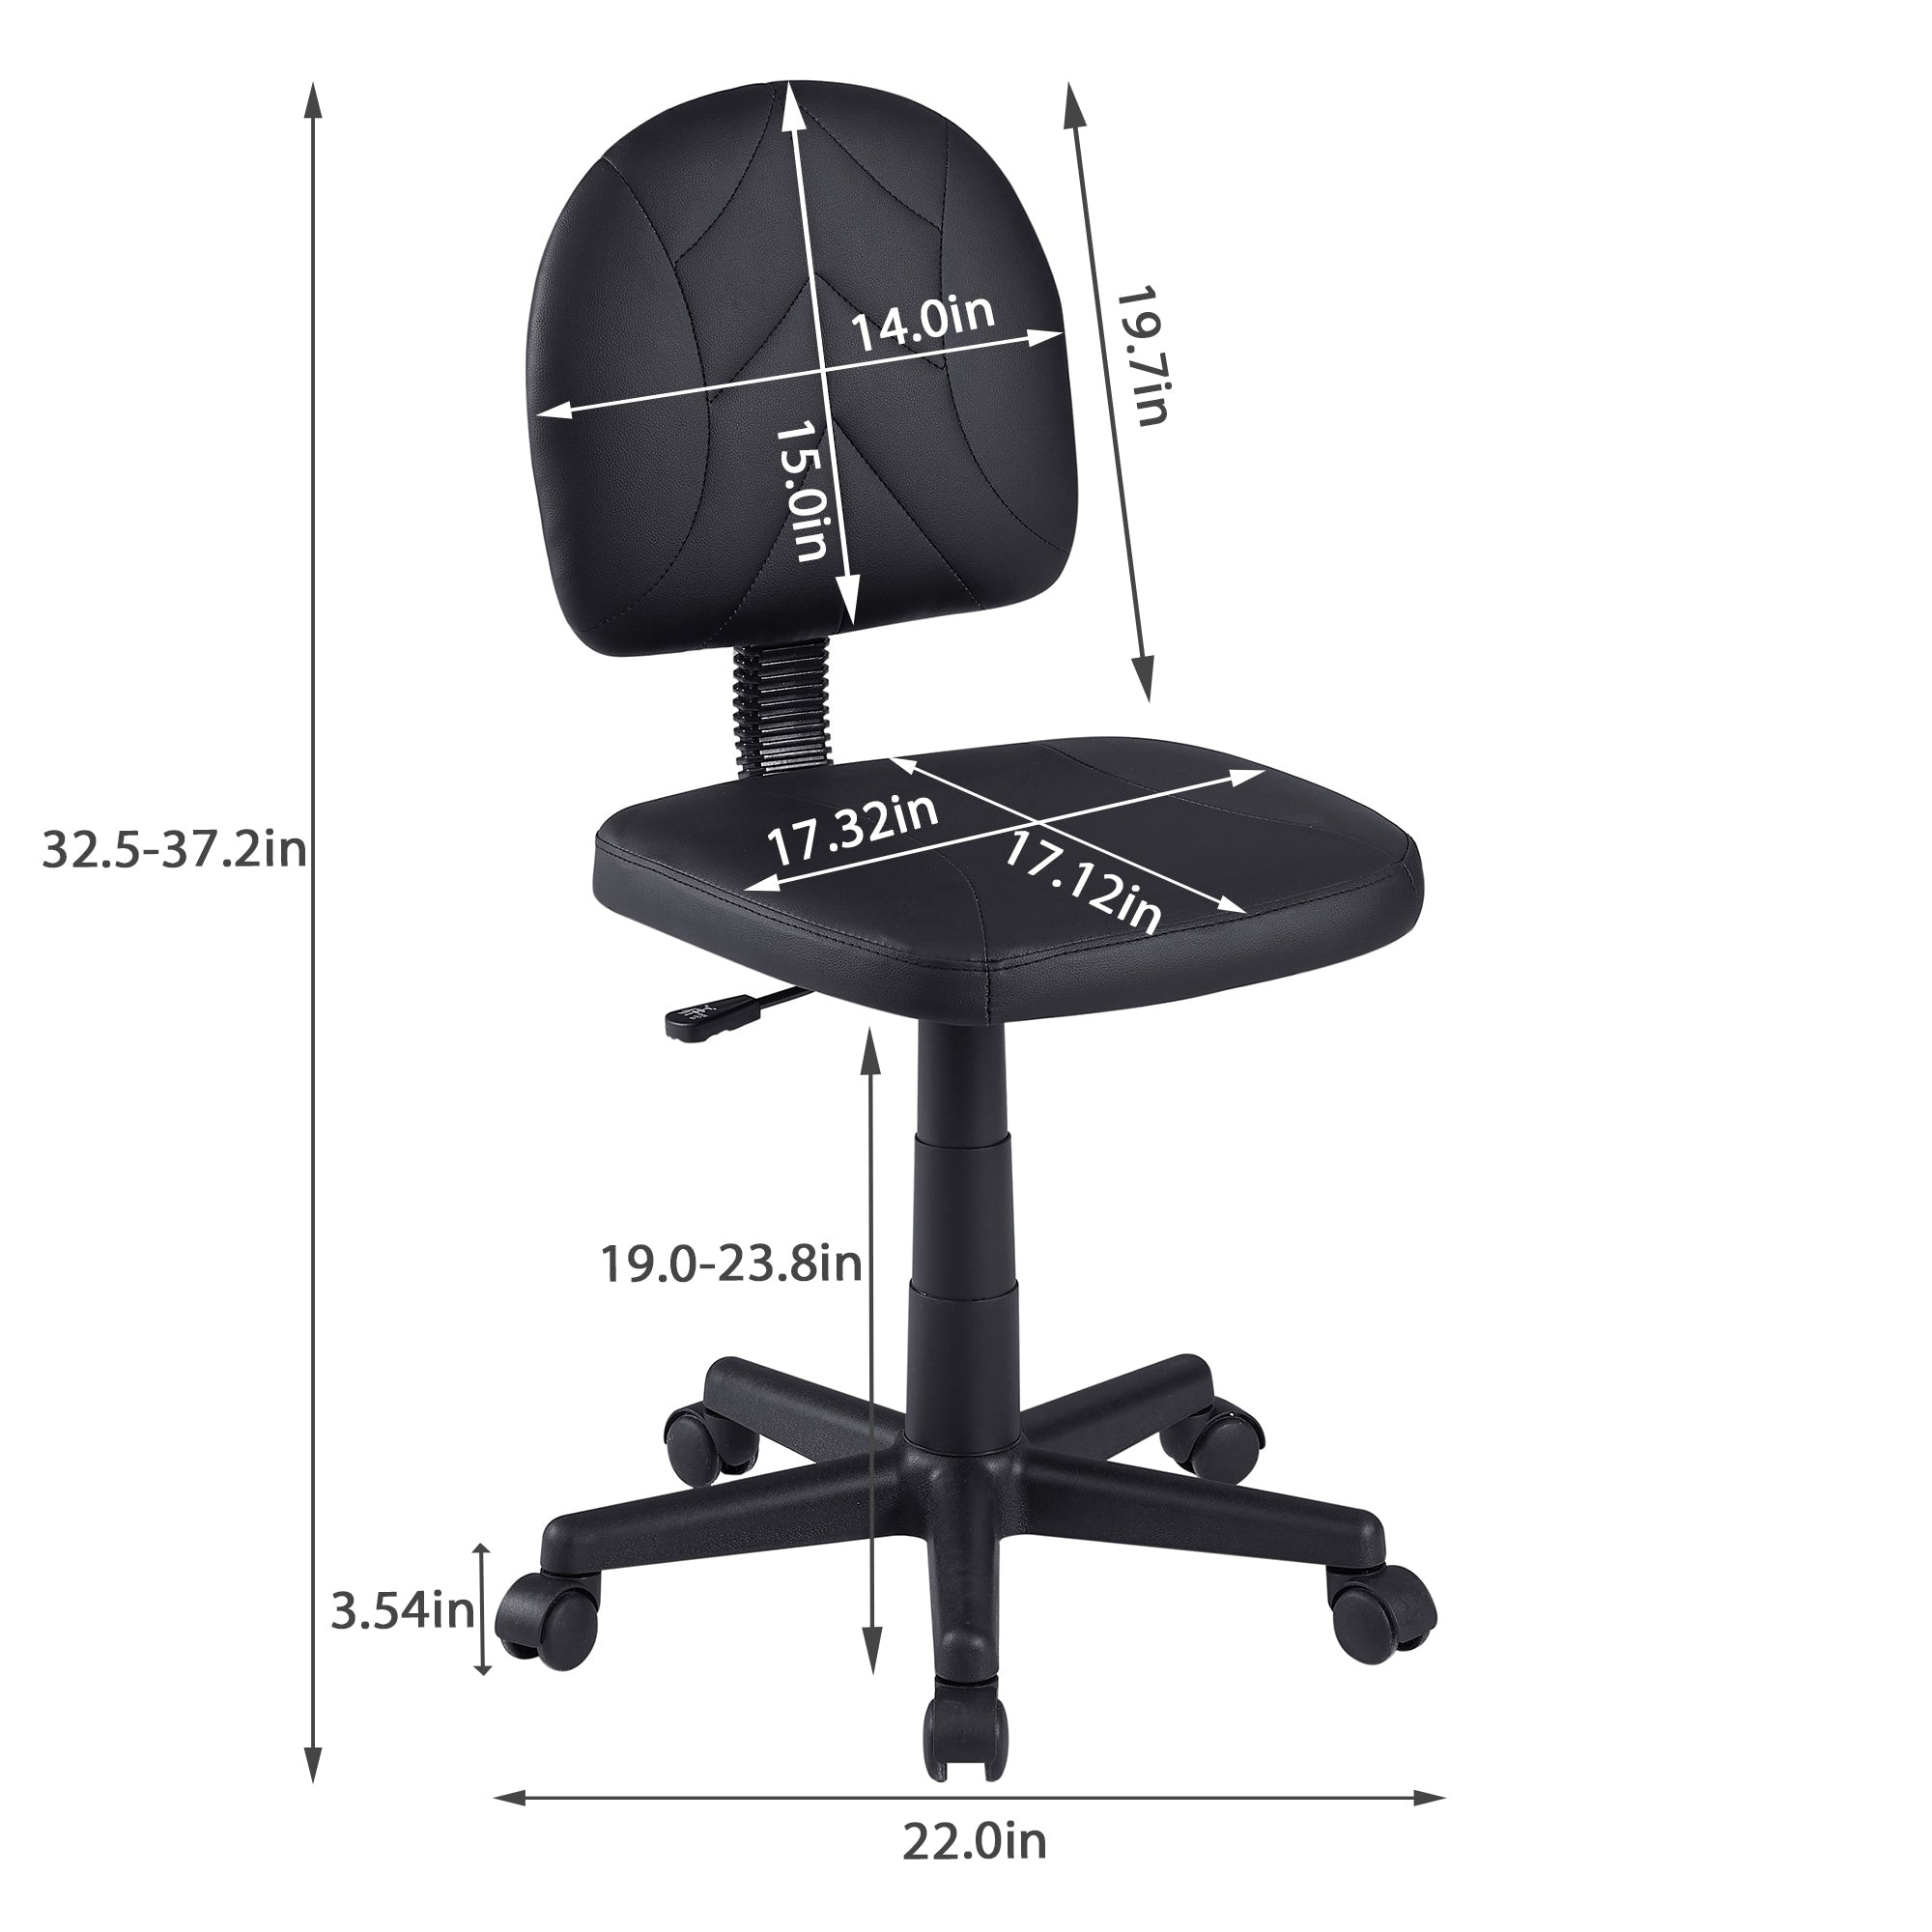 https://ak1.ostkcdn.com/images/products/is/images/direct/c7738d57d10e447a4a8124c0c11ee24ab461aab4/VECELO-Simple-Design-Chair%2C-Morden-Adjustable-Height-Office-Chair-Desk-Chair-without-Arm.jpg